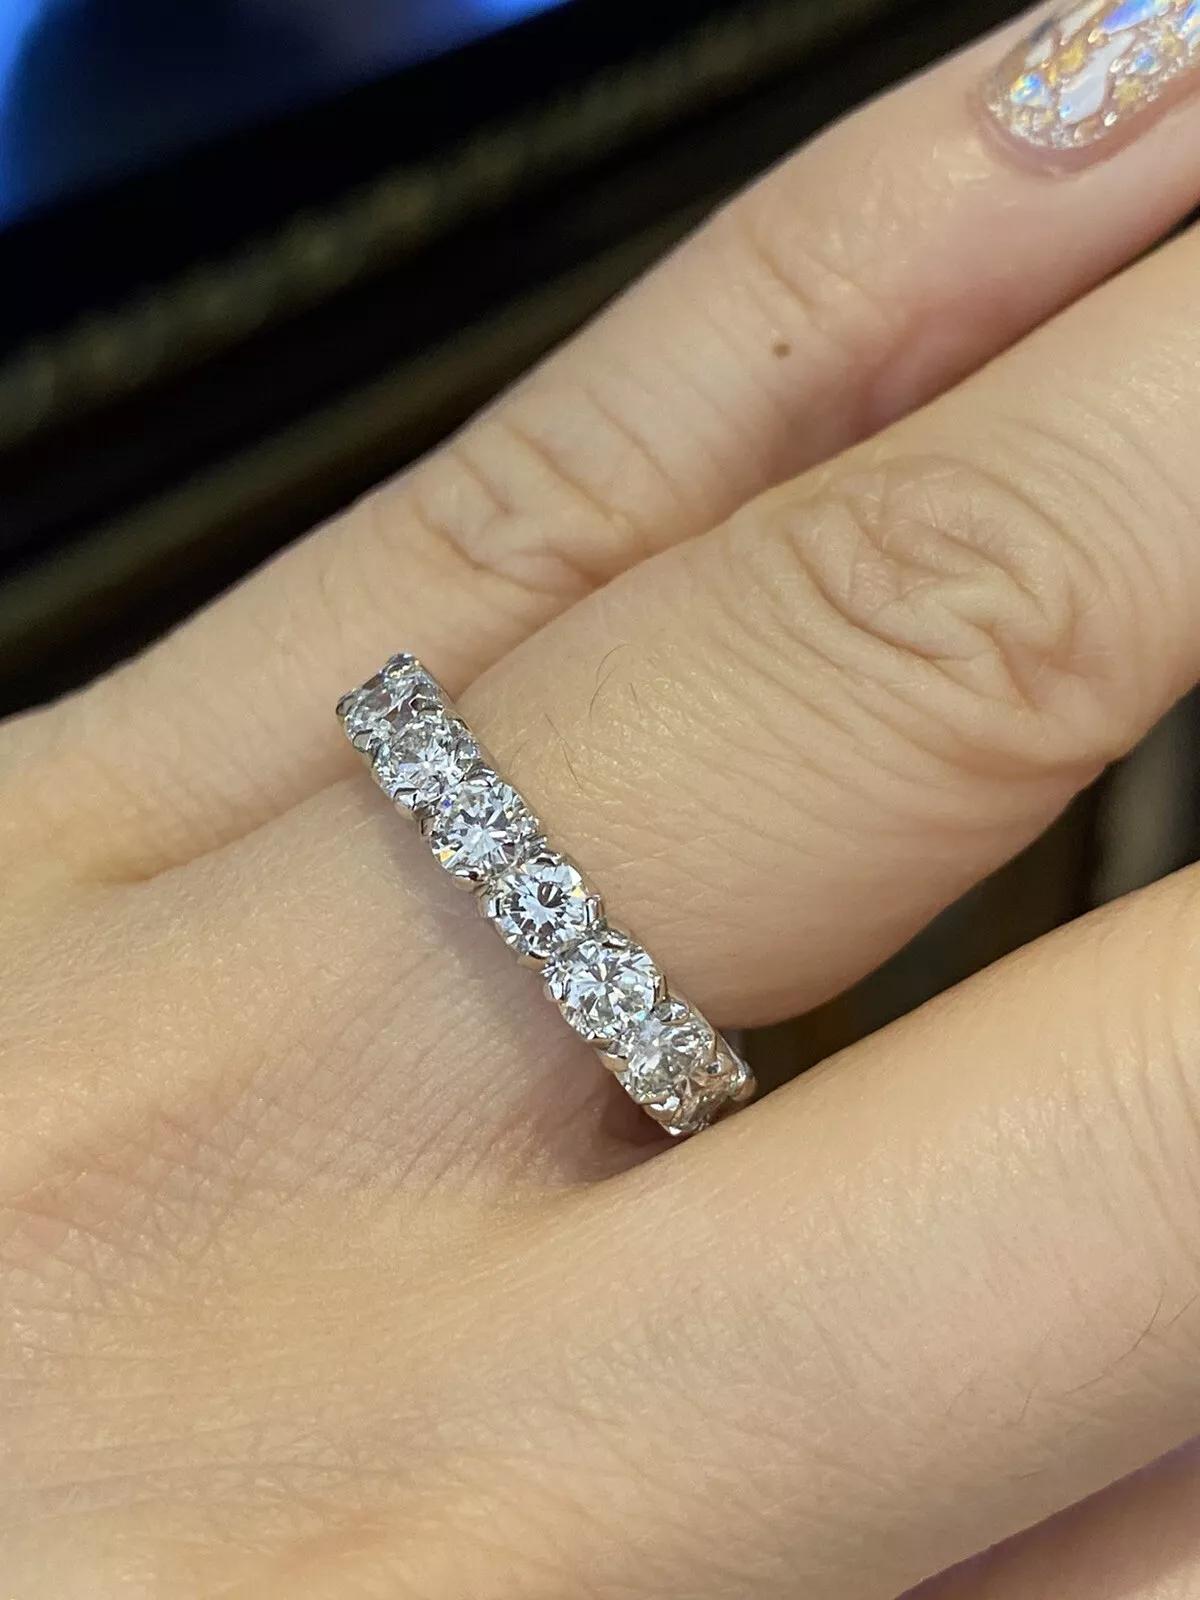 Round Diamond Eternity Band Ring 3.86 carat total weight in Platinum 4 mm Size 5.25 

Round Diamond Eternity Band Ring features 18 Round Brilliant cut Diamonds, averaging 0.214 carats each, individually prong-set in high-polished Platinum.

Total